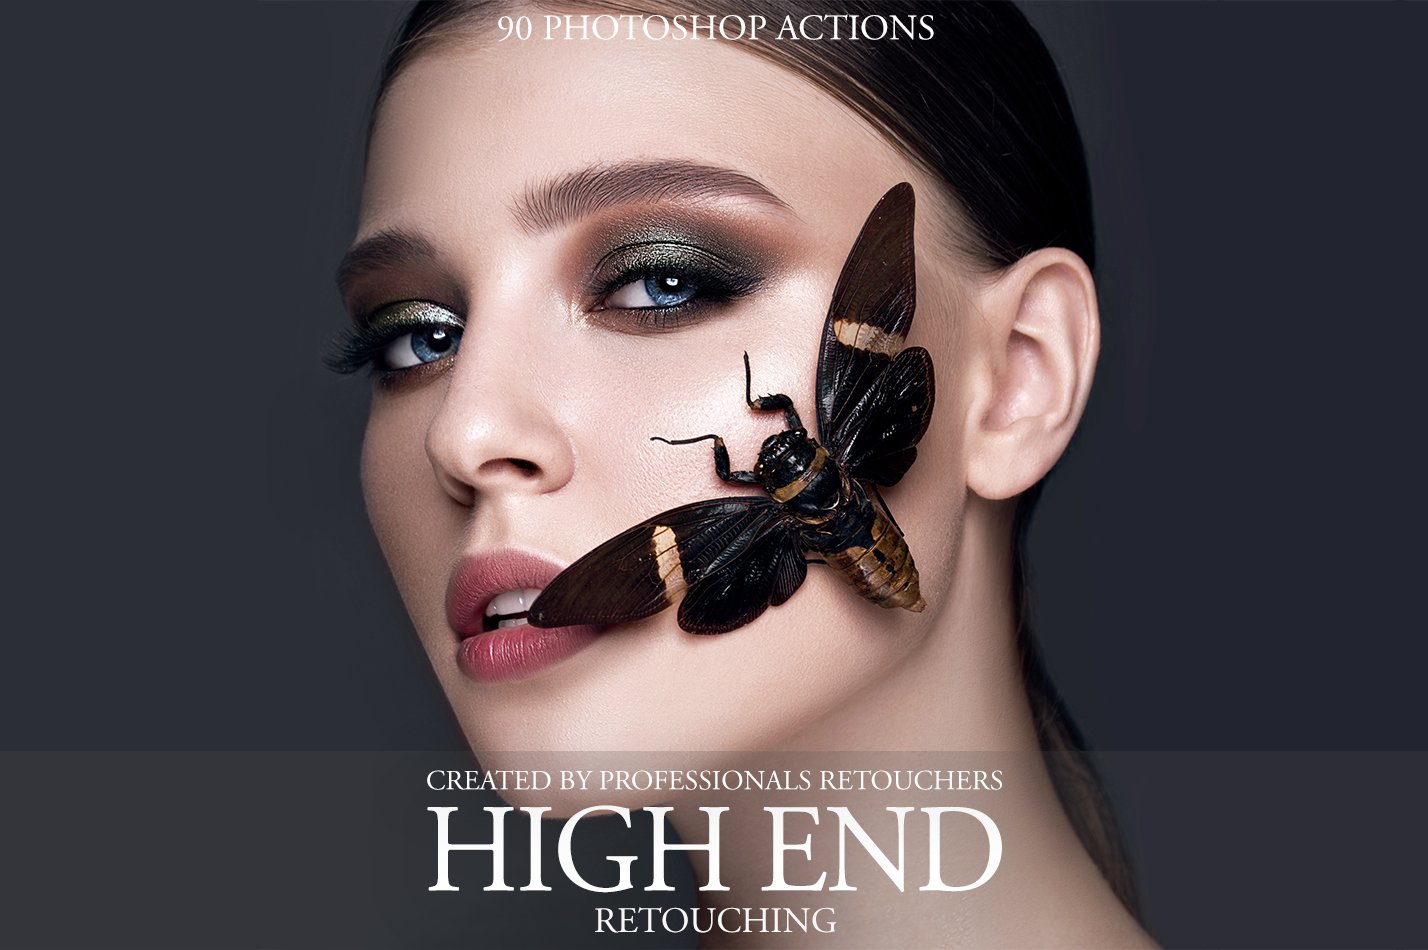 High End Retouching Photoshop Actioncover image.